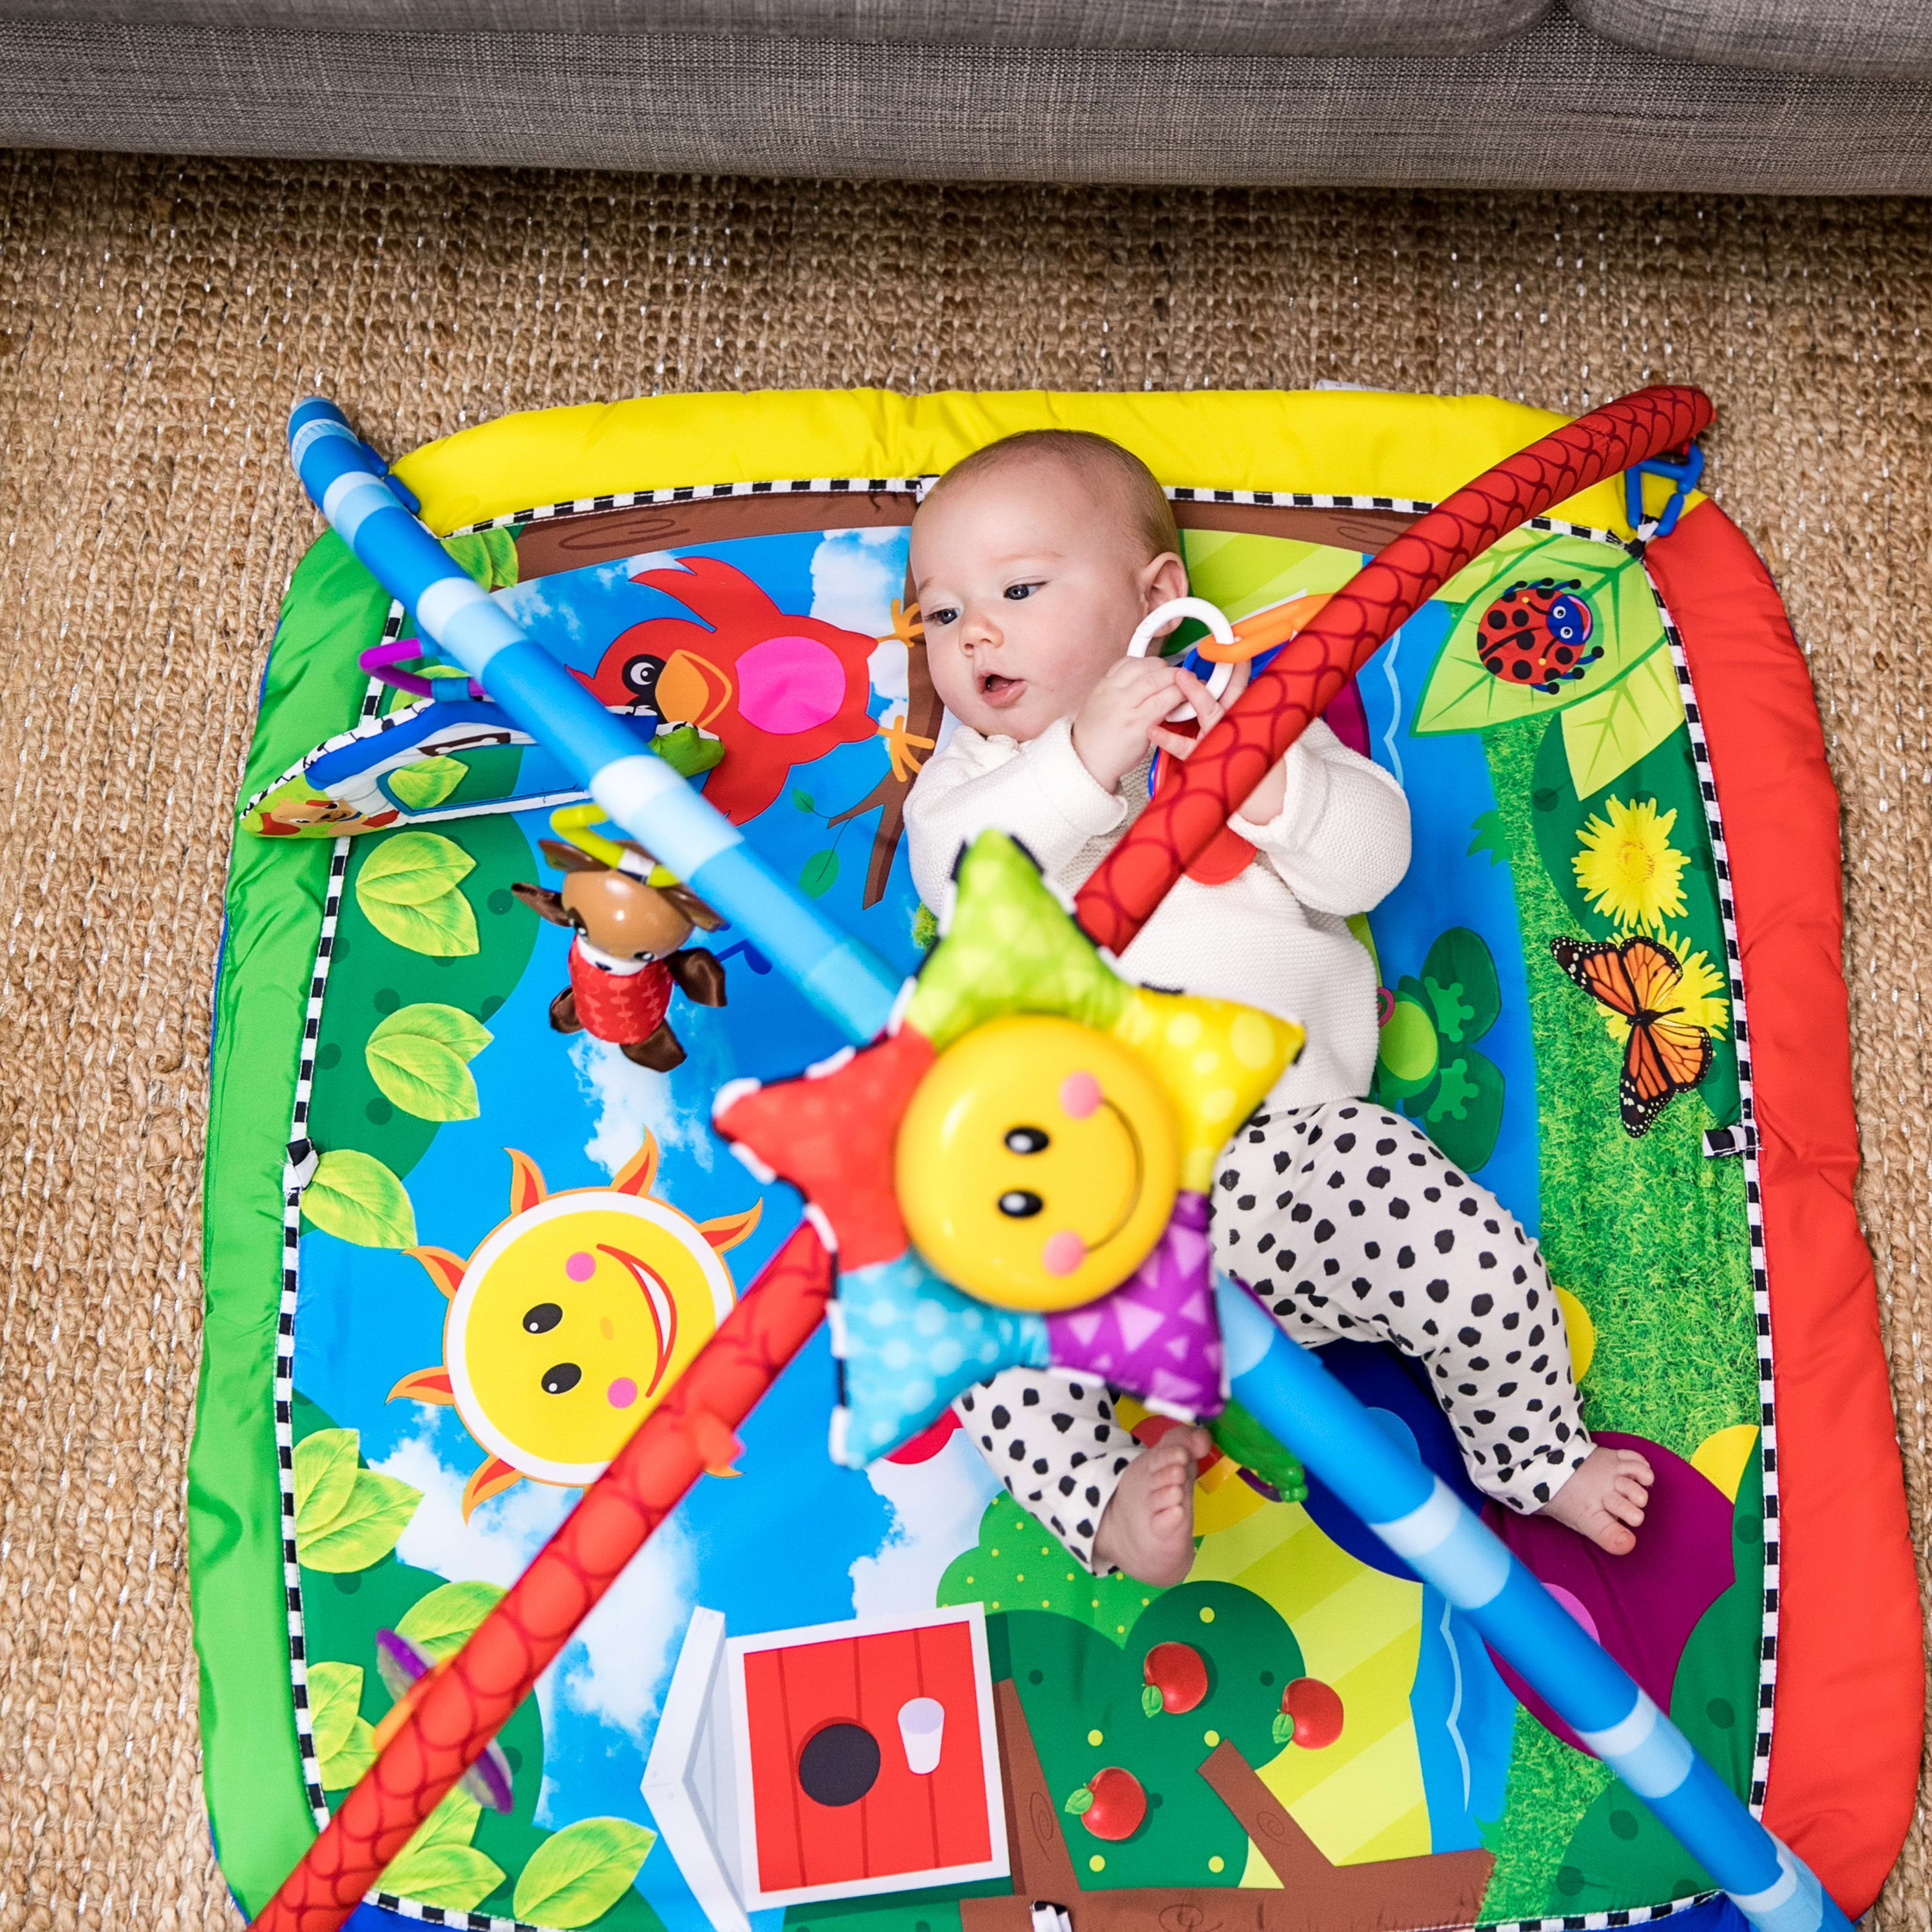 Baby Einstein Caterpillar and Friends Lights and Music Infant Activity Mat - image 11 of 13